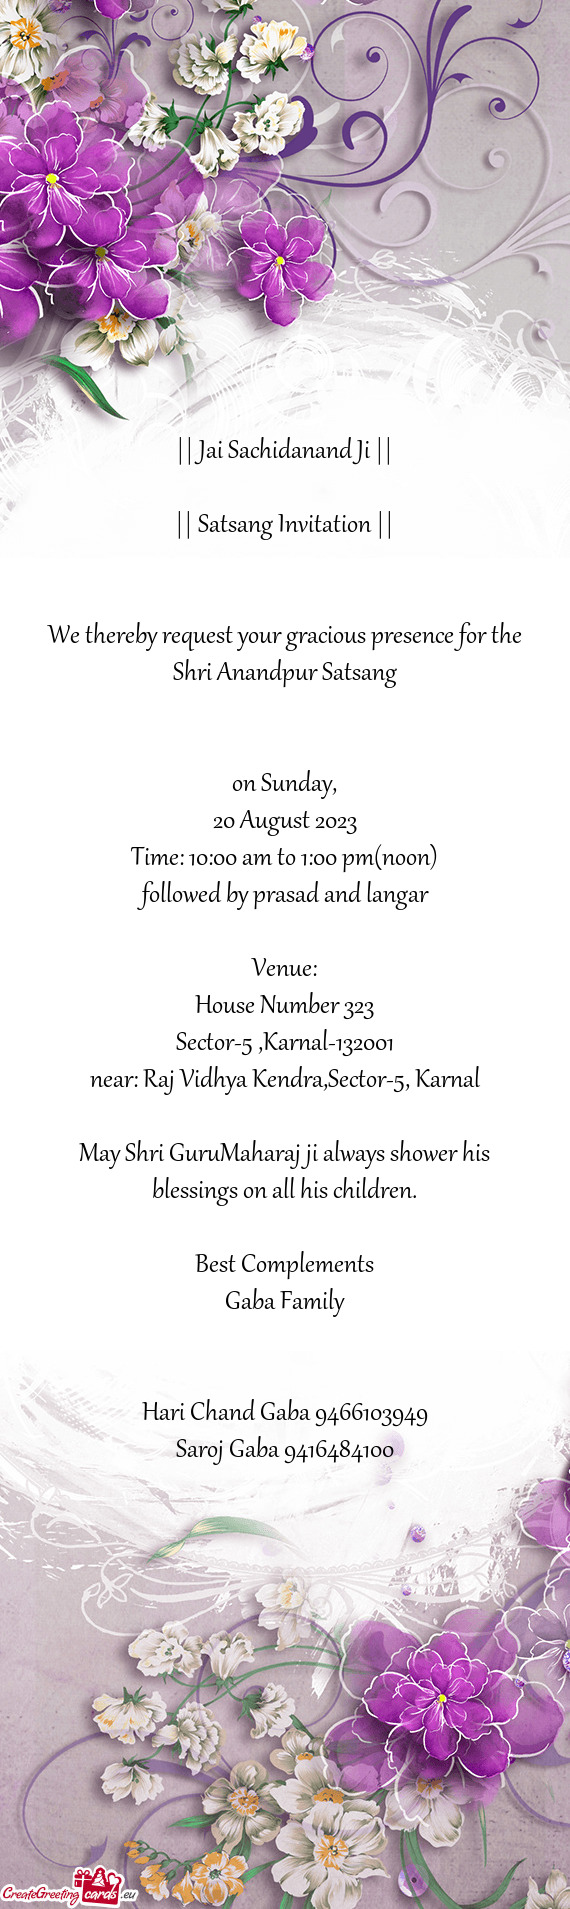 We thereby request your gracious presence for the Shri Anandpur Satsang